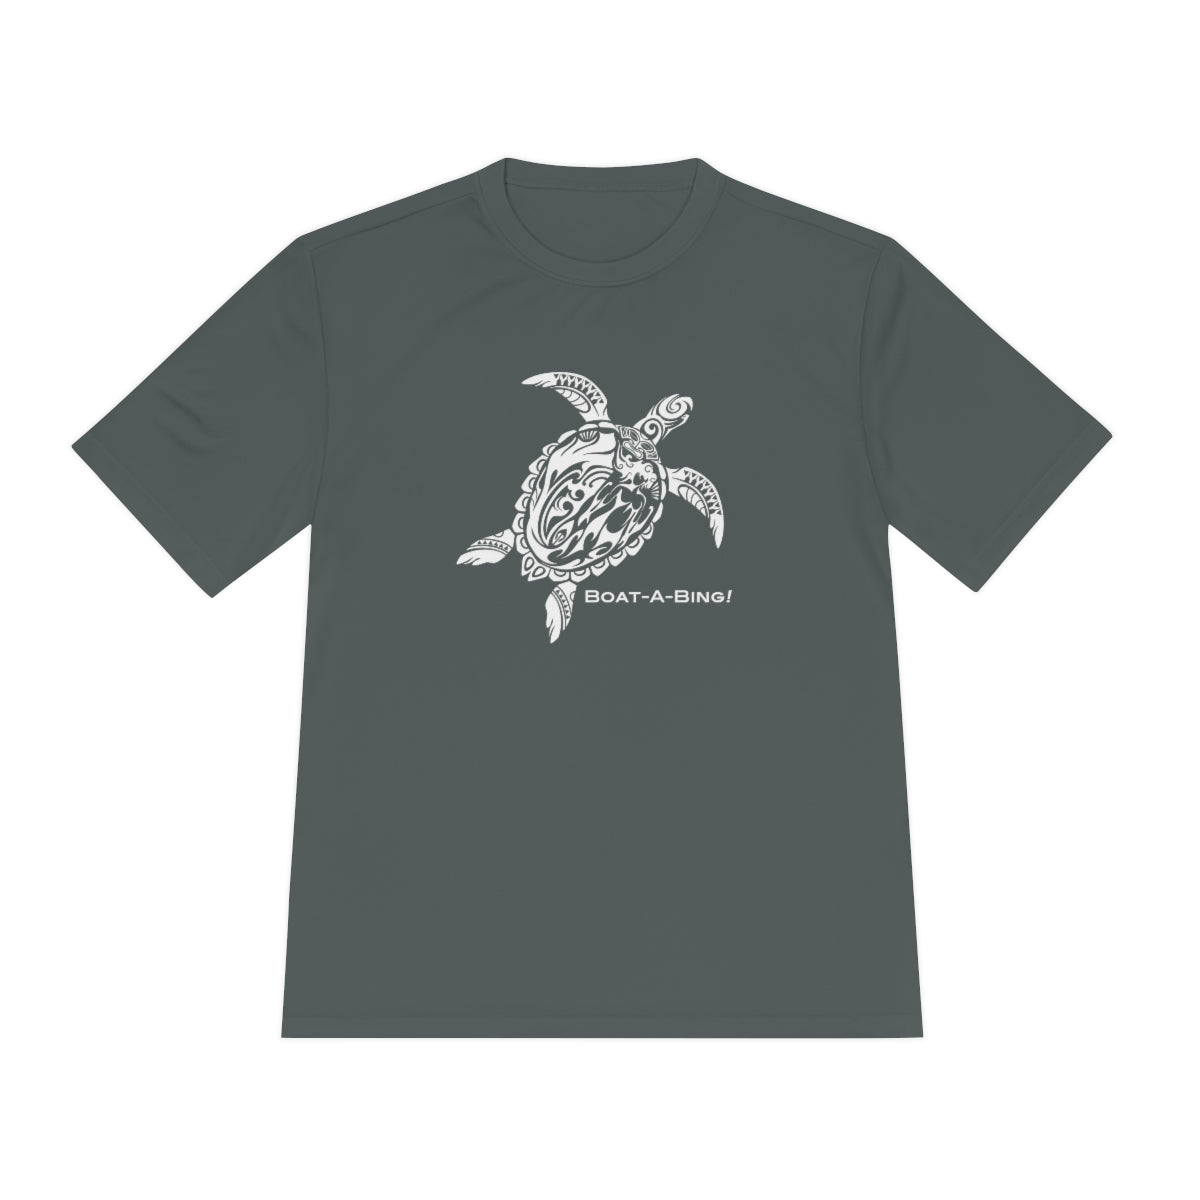 Mens Diver/Turtle Blue and Green T-Shirt – Hobo's Cafe Key Largo